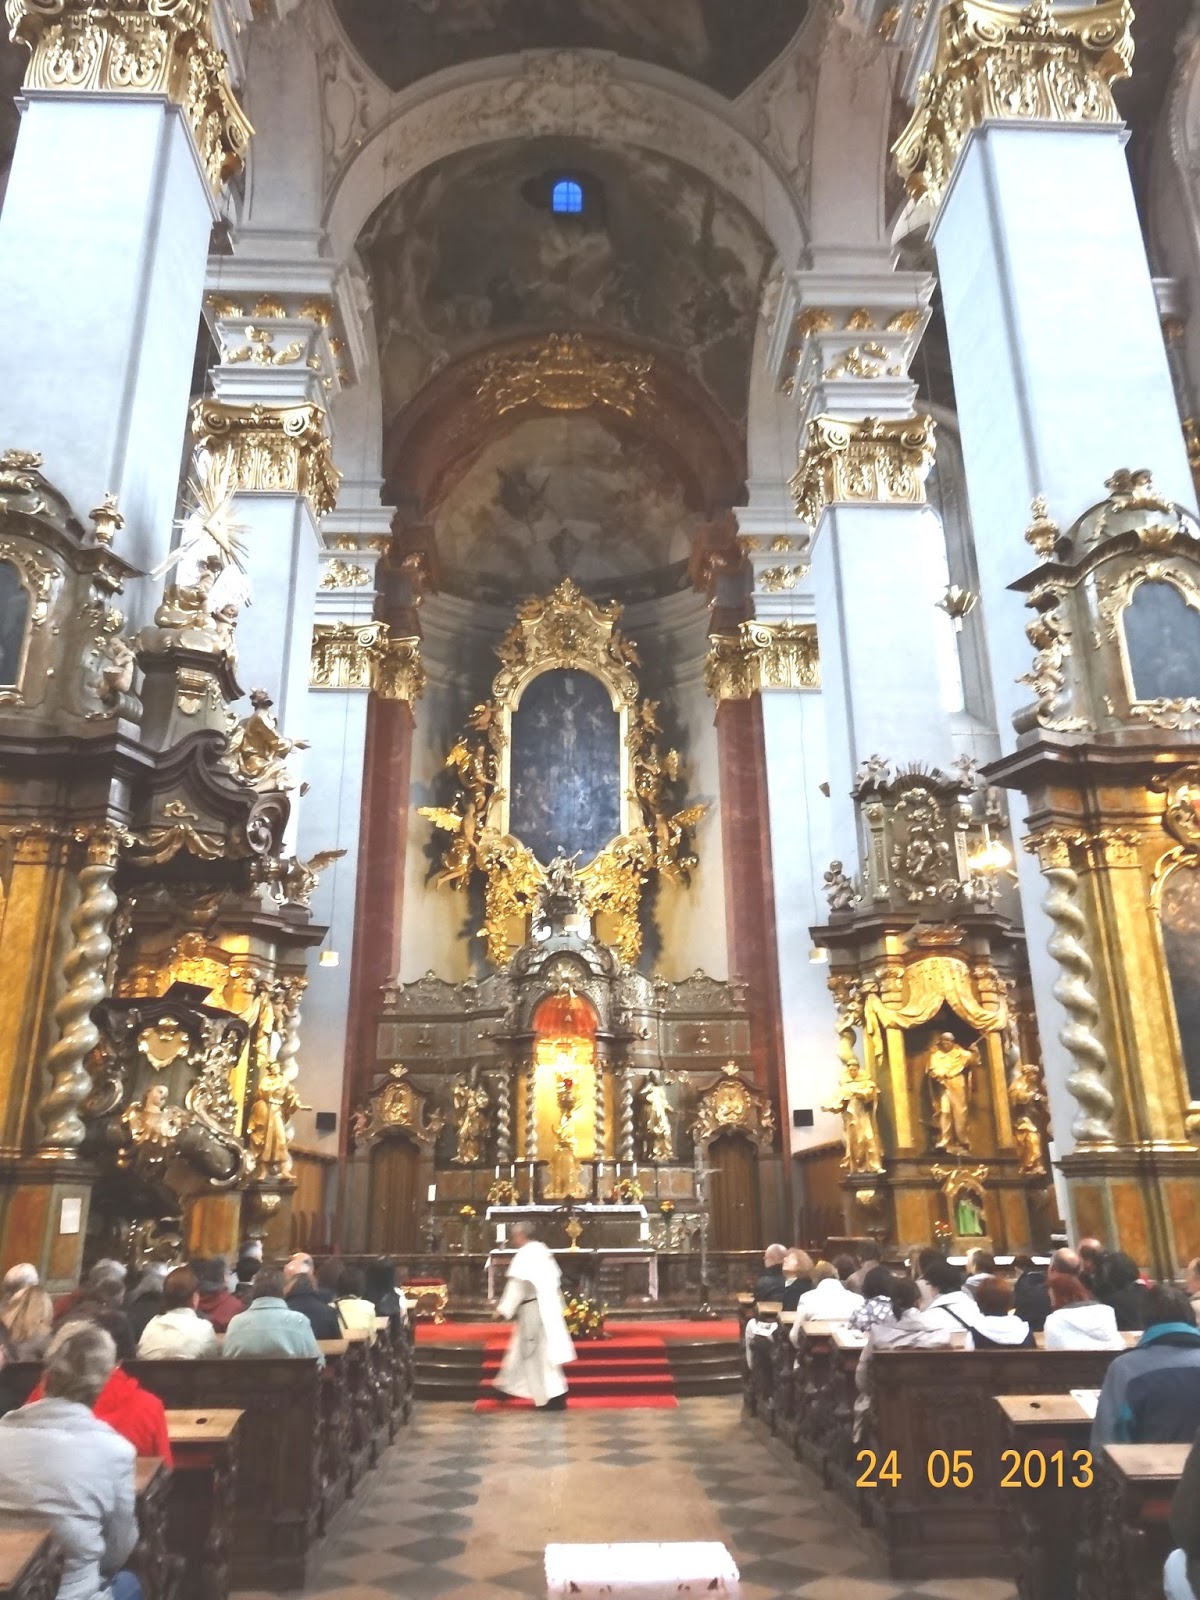 St. Giles Church has a richly decorated baroque interior